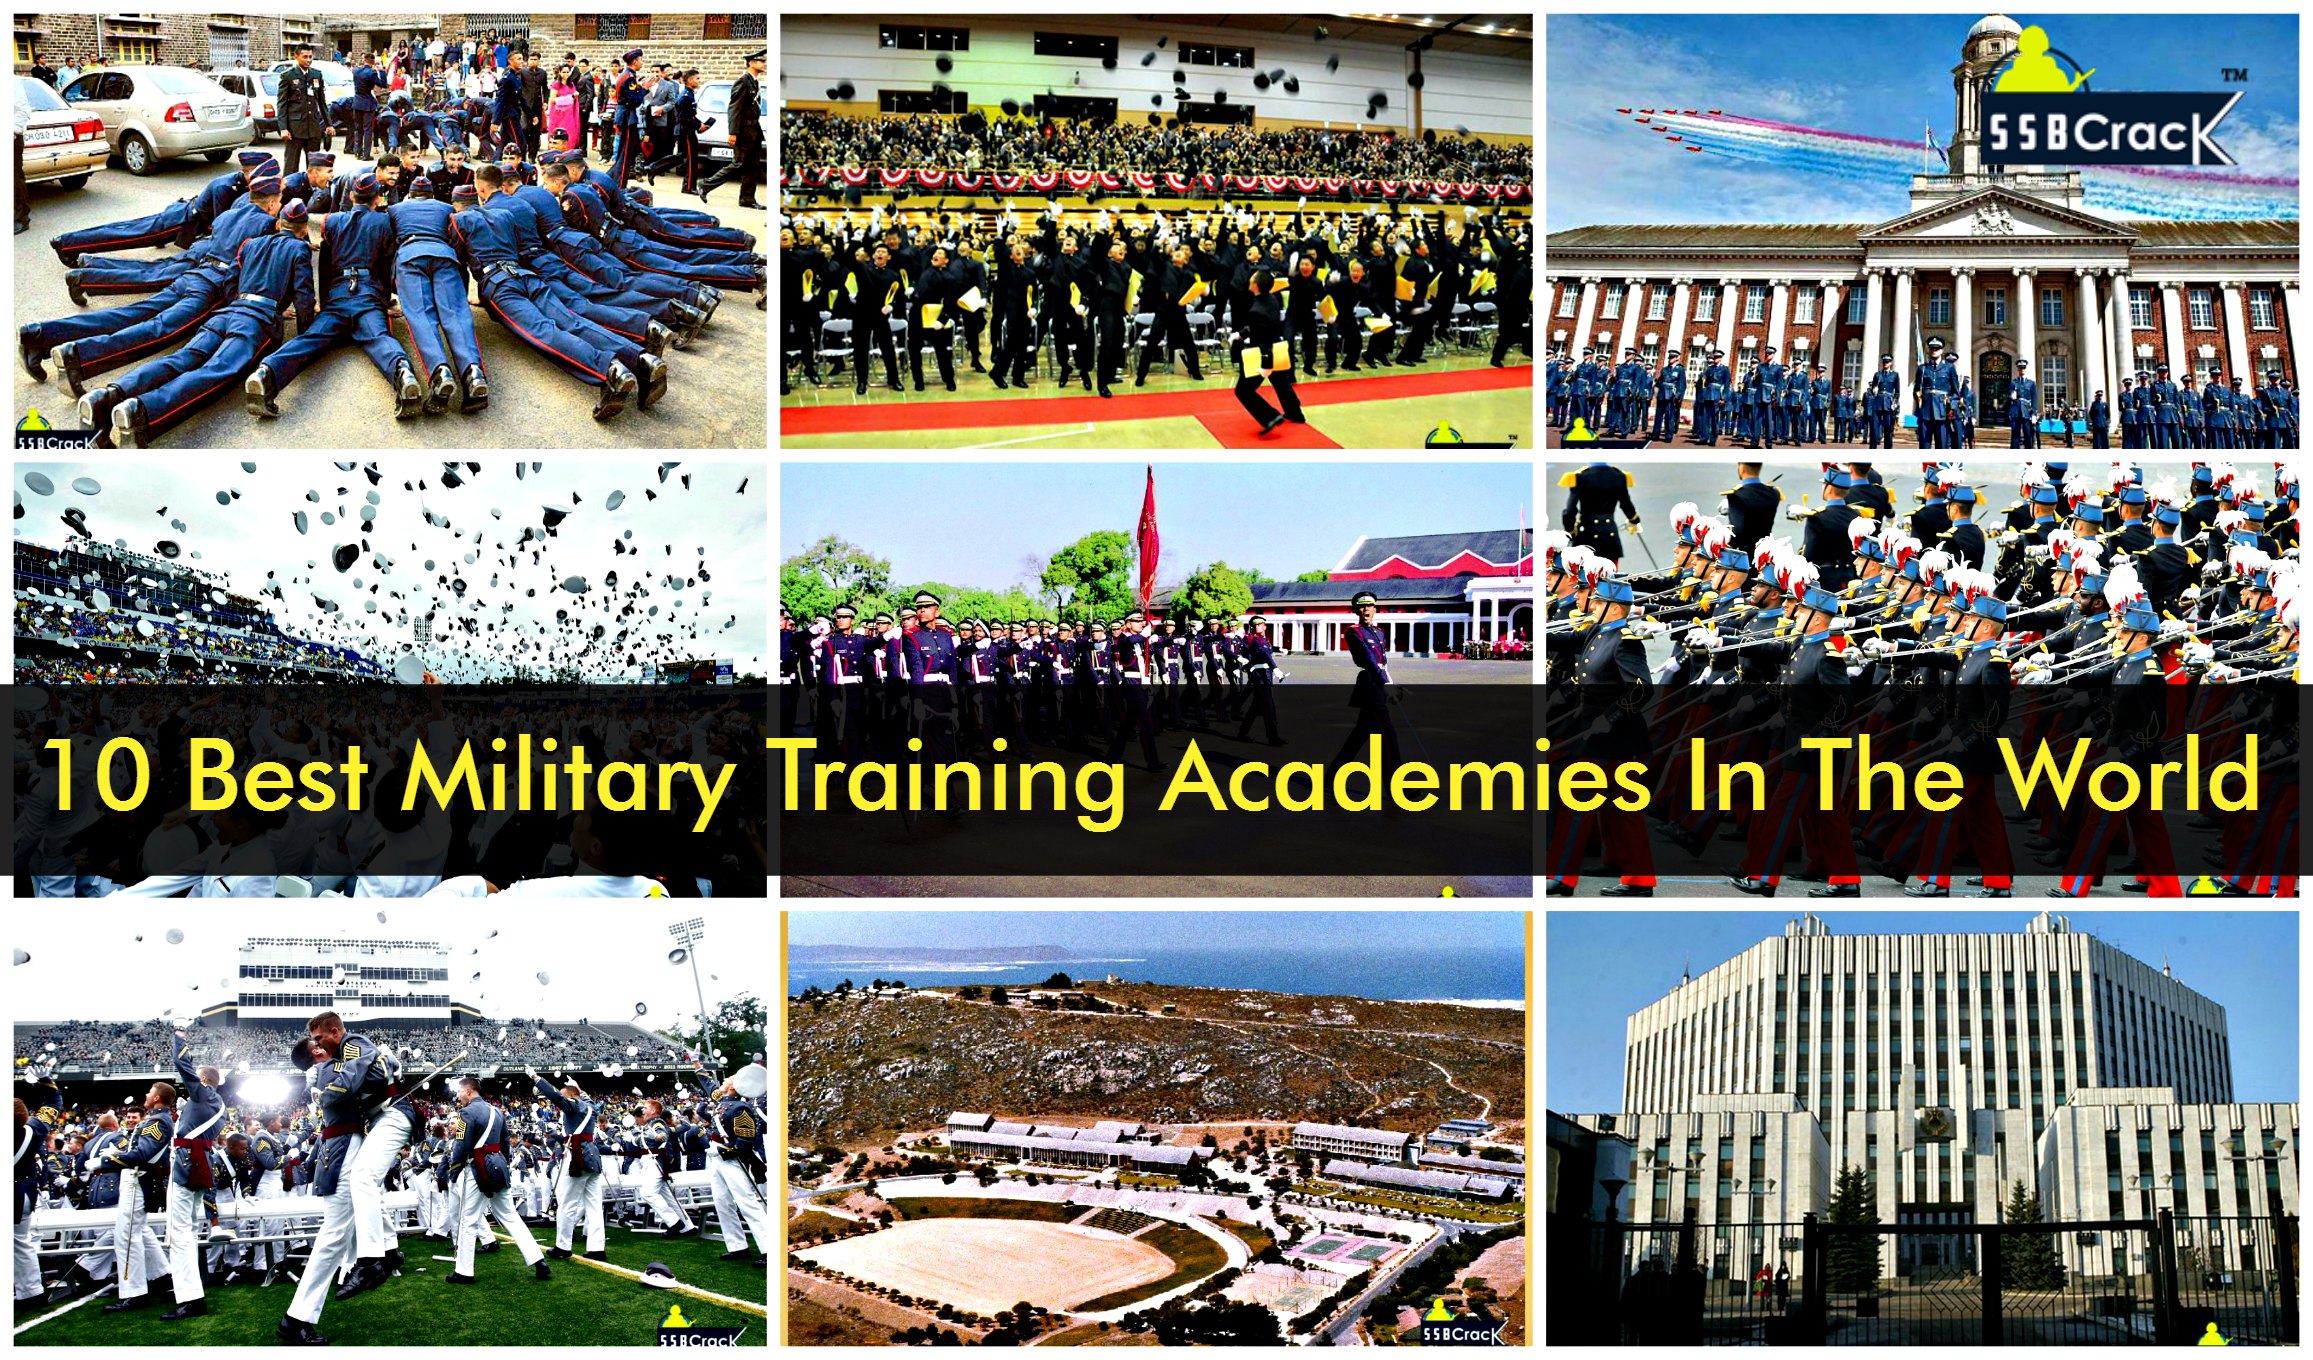 10 Best Military Training Academies In The World